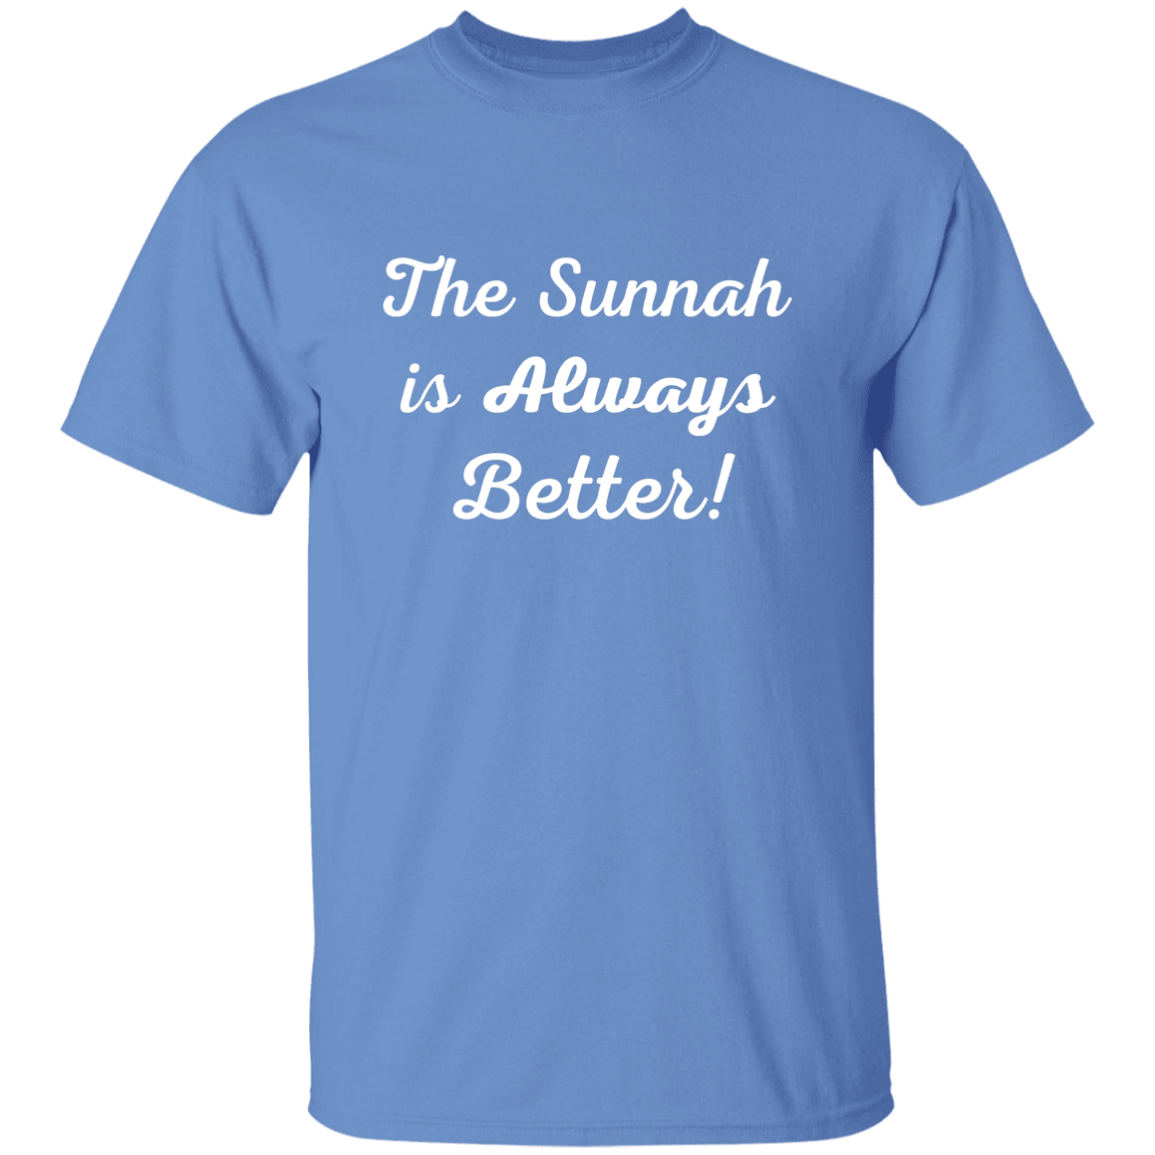 THE SUNNAH IS ALWAYS BETTER!  T-Shirt (MORE COLOR OPTIONS)